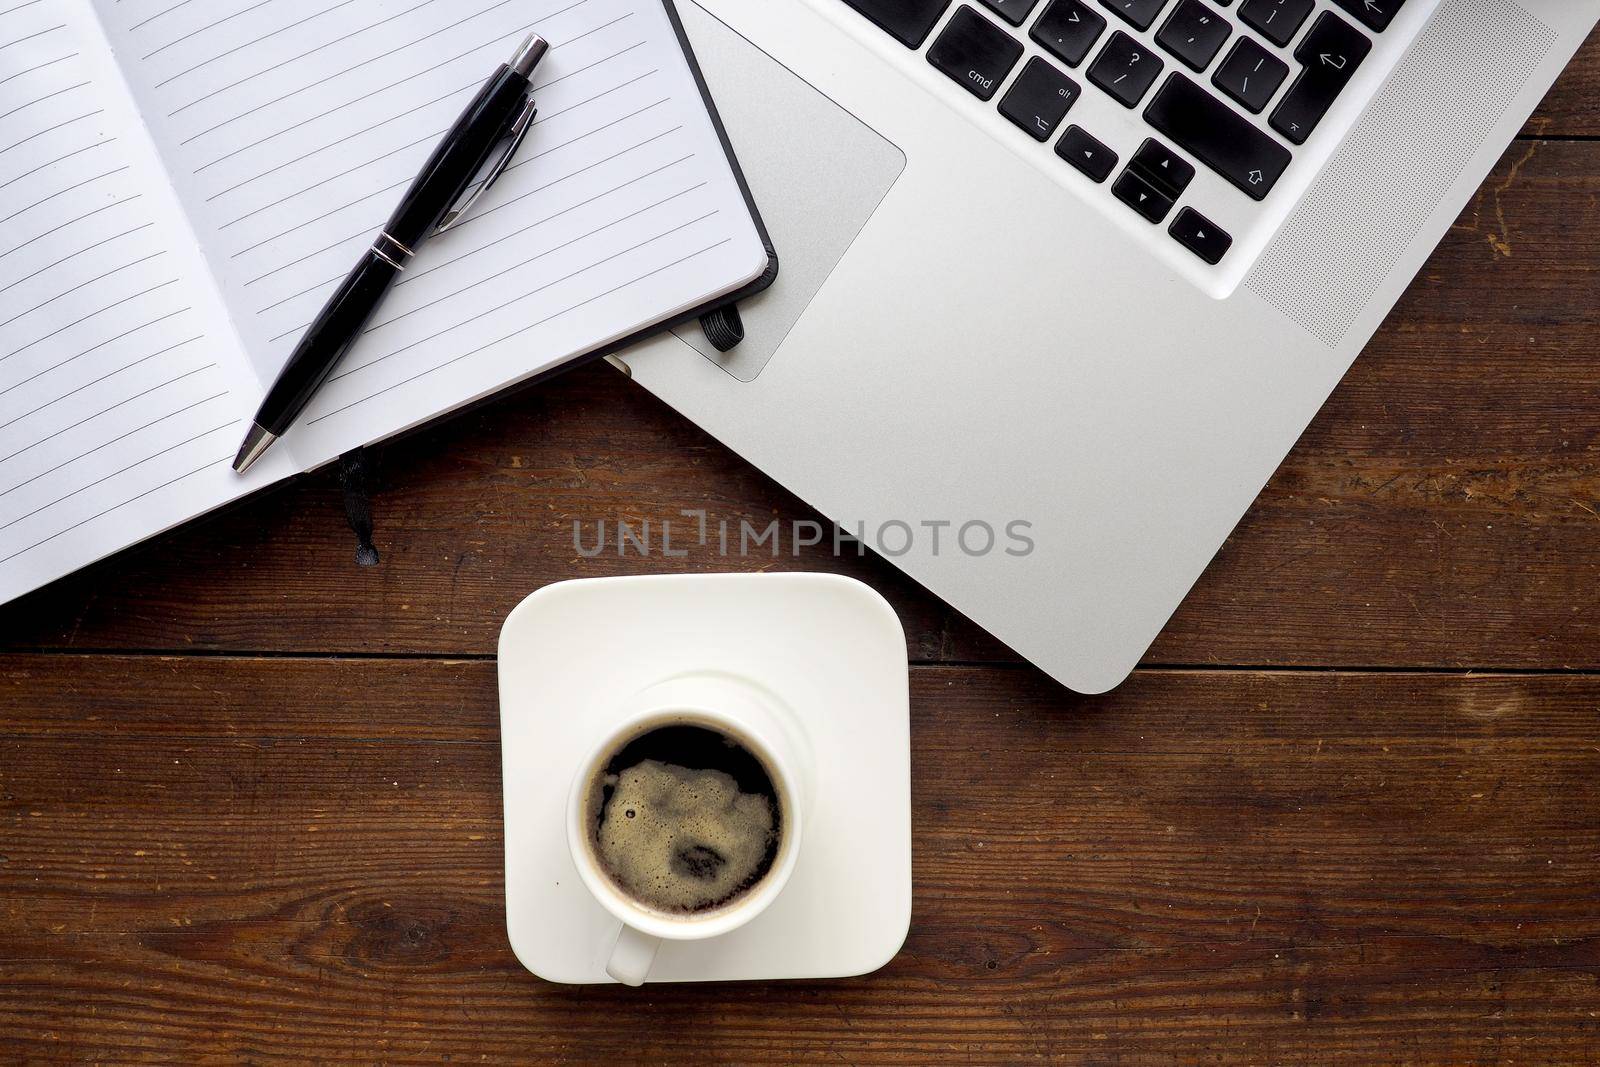 Coffee and notepad with computer, wooden desk by fivepointsix